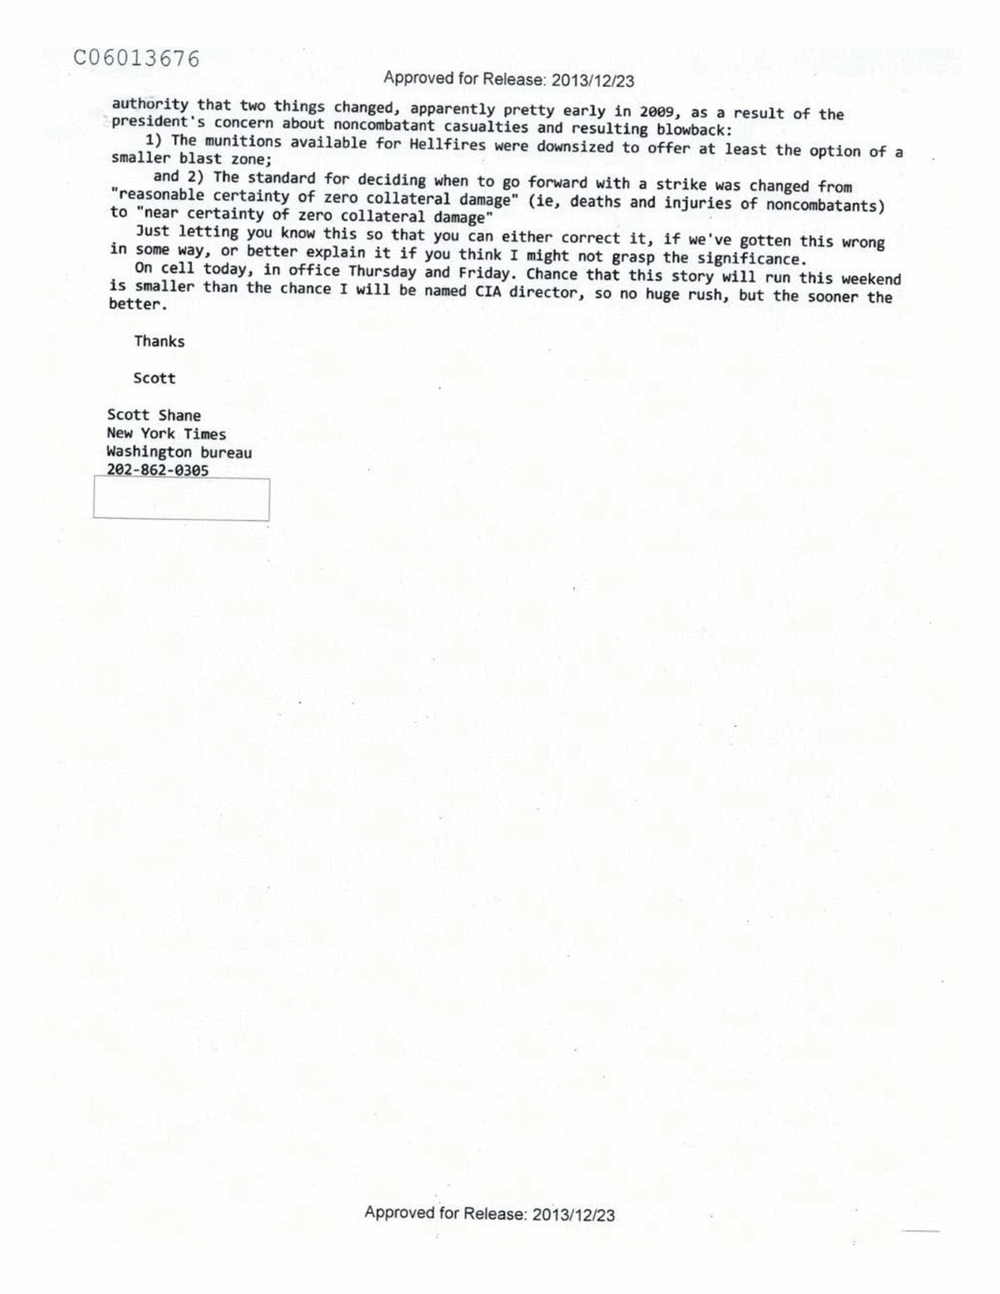 Page 531 from Email Correspondence Between Reporters and CIA Flacks